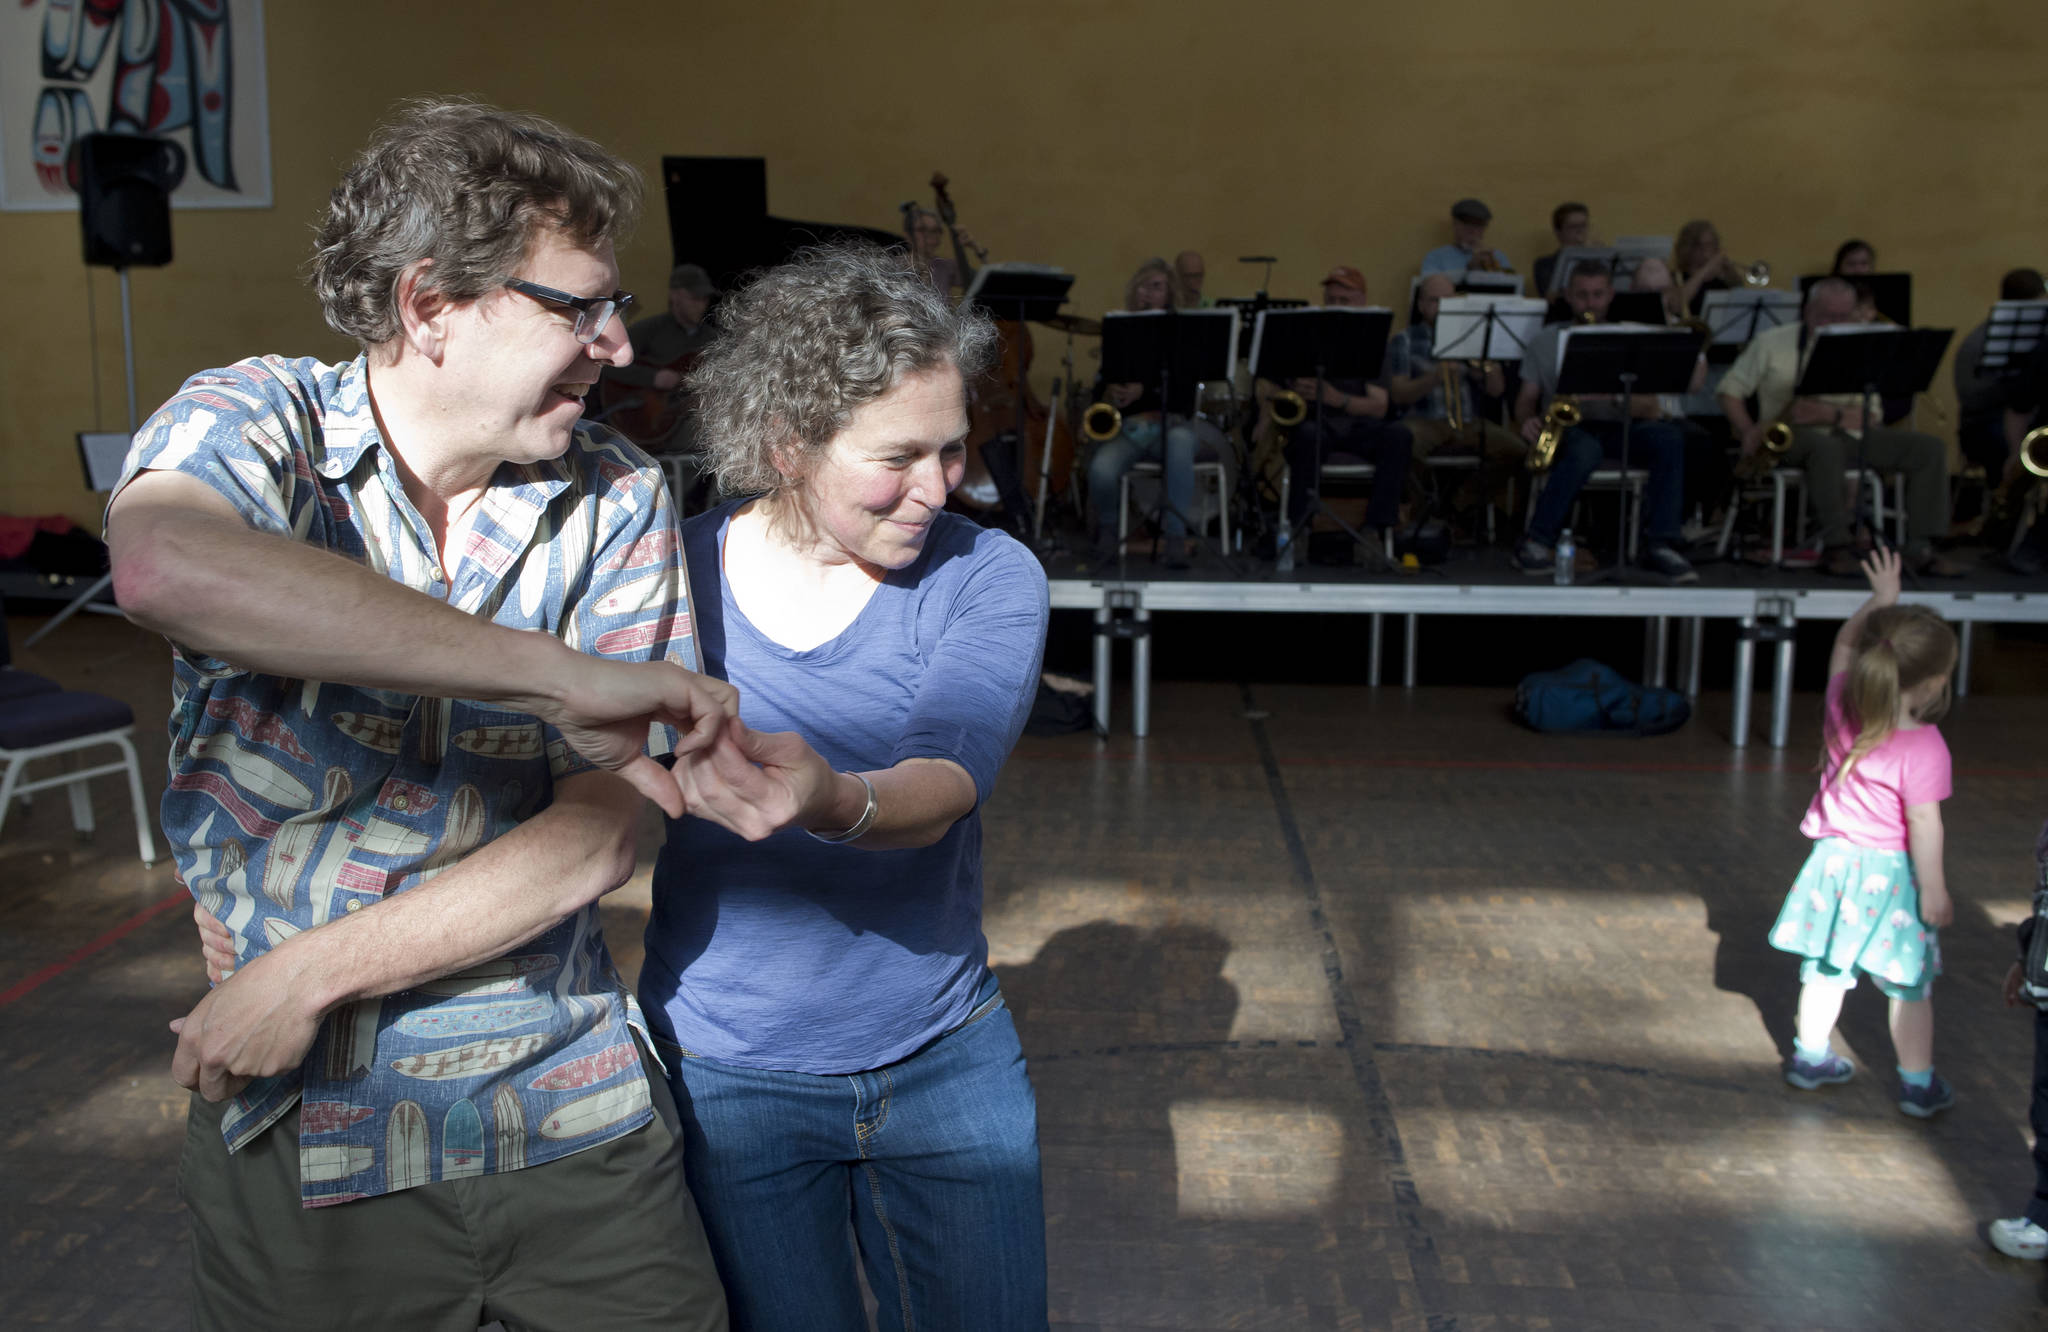 Dr. Alex Malter dances with Dr. Marna Schwartz to the music of the Thunder Mountain Big Band during the Block Party at the Juneau Arts & Culture Center on Friday, June 15, 2018. (Michael Penn | Juneau Empire)